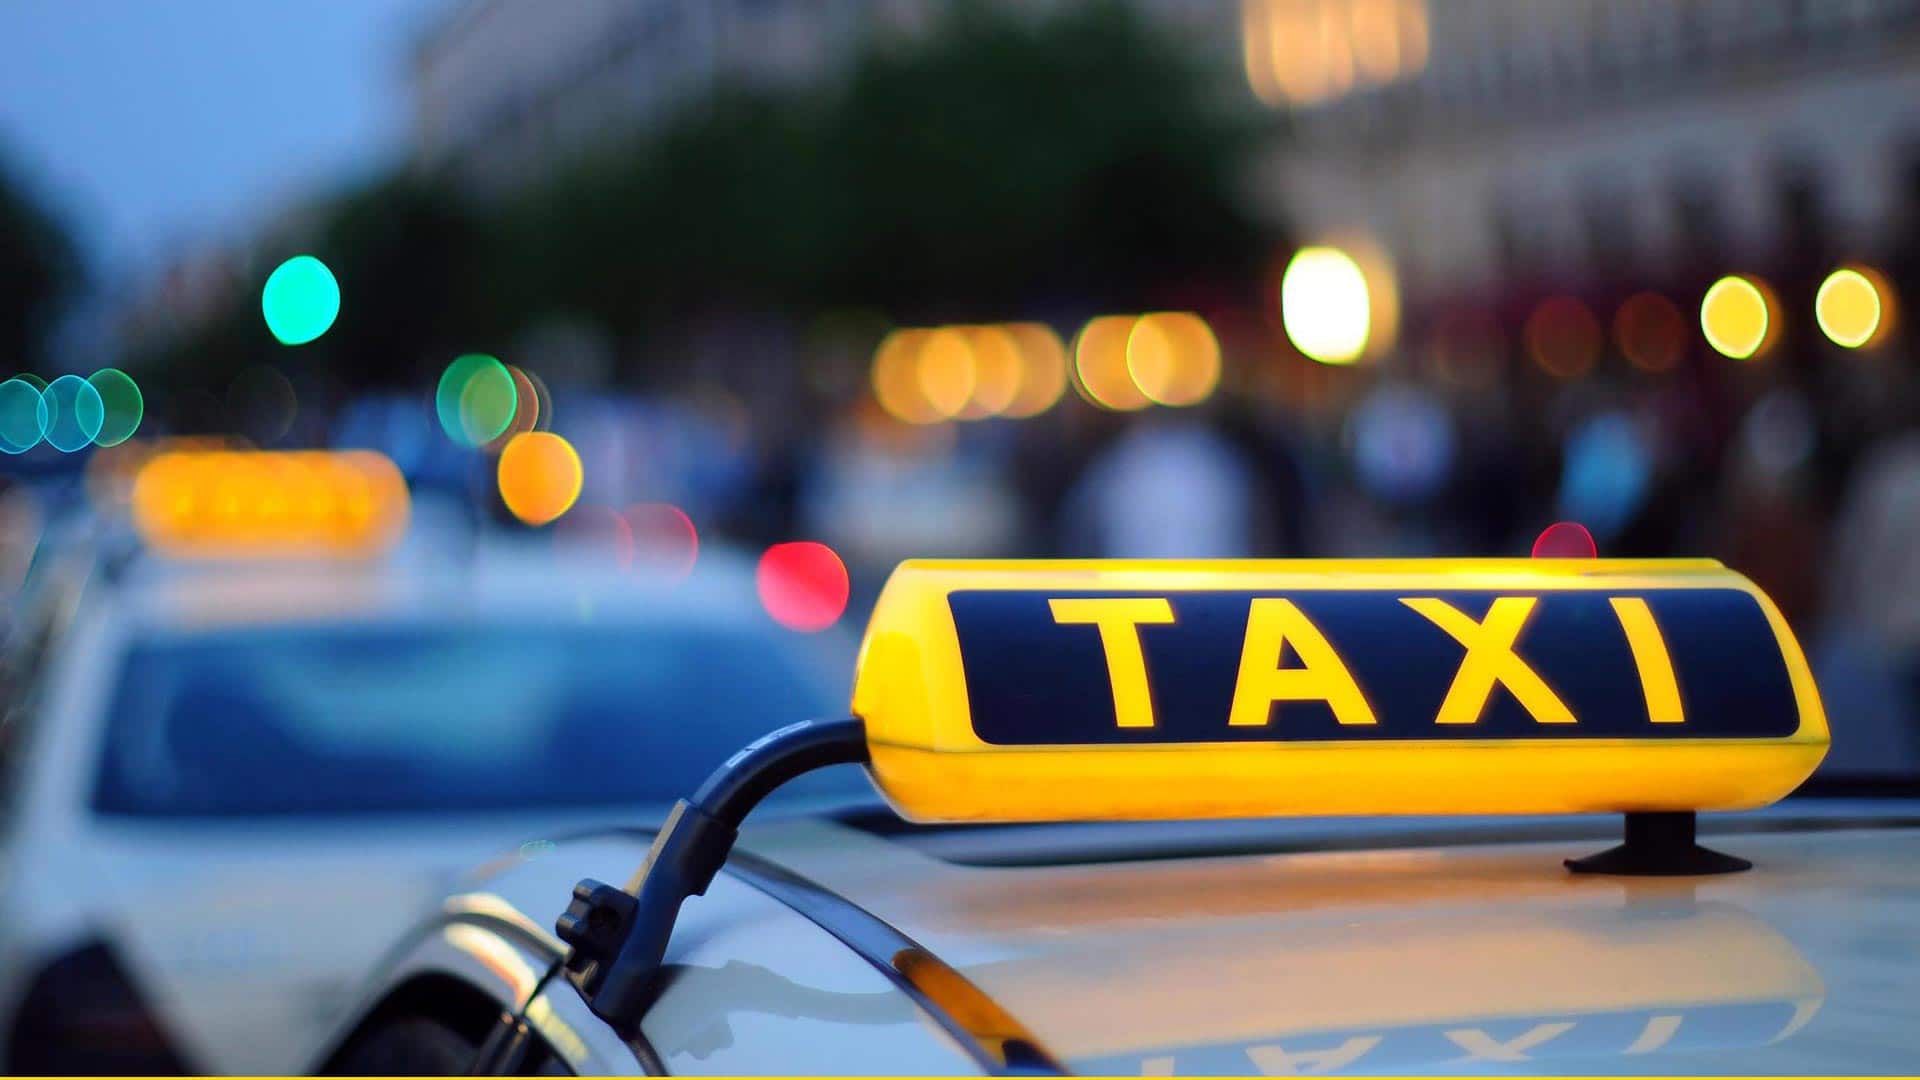 New York city taxis, regulatory reform  for the 21st century city